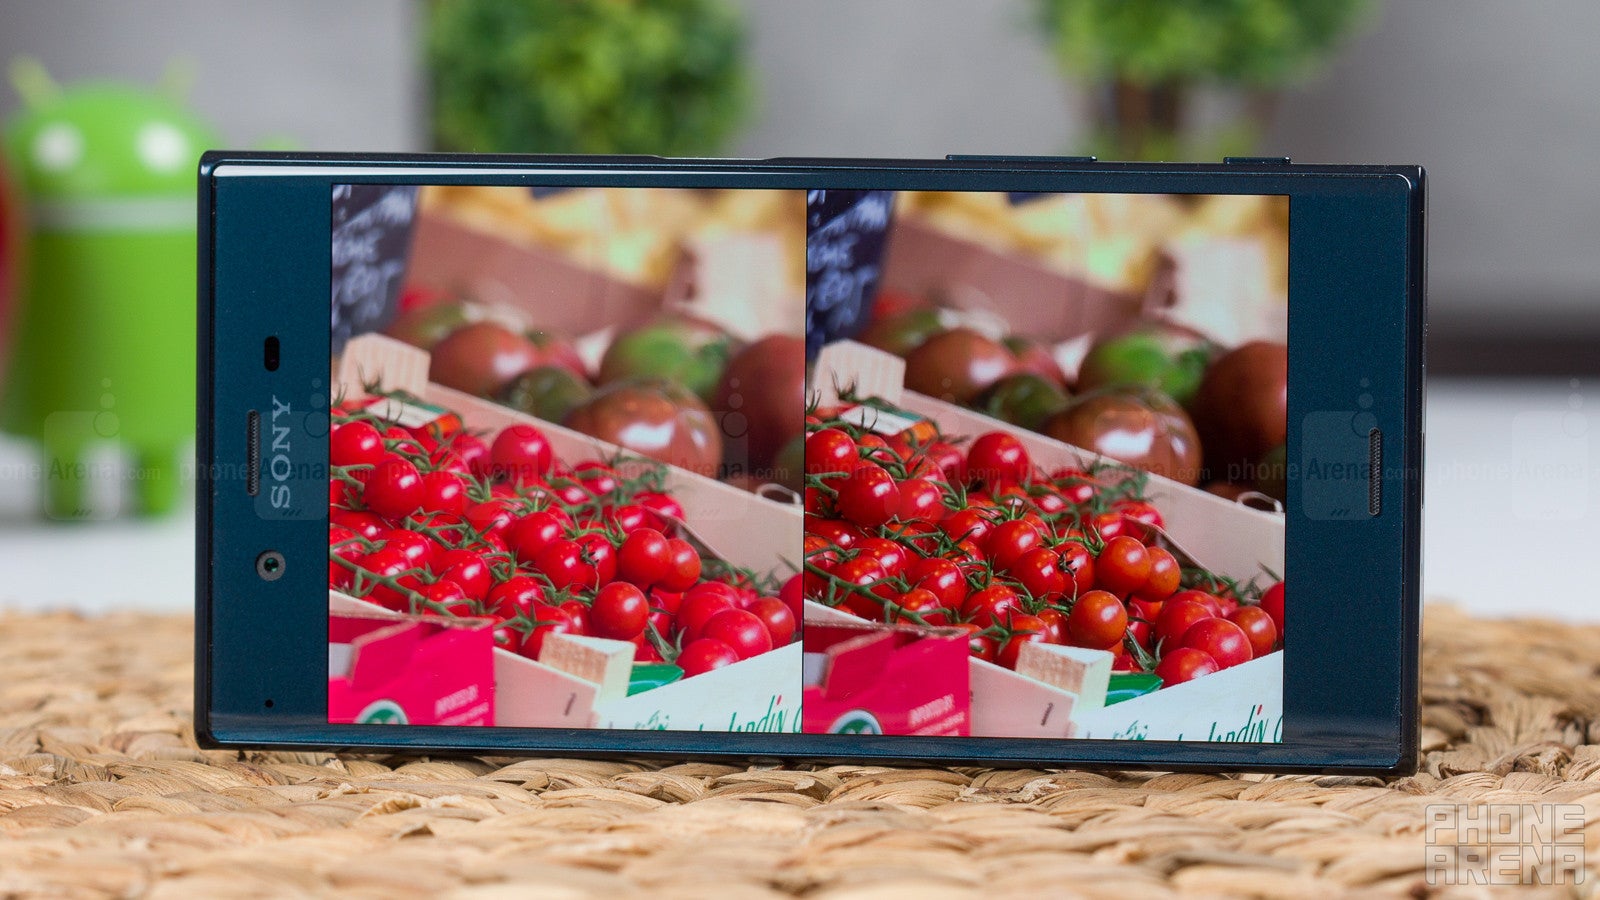 Sony Xperia XZ and Xperia X Compact Q&amp;A: Your questions answered